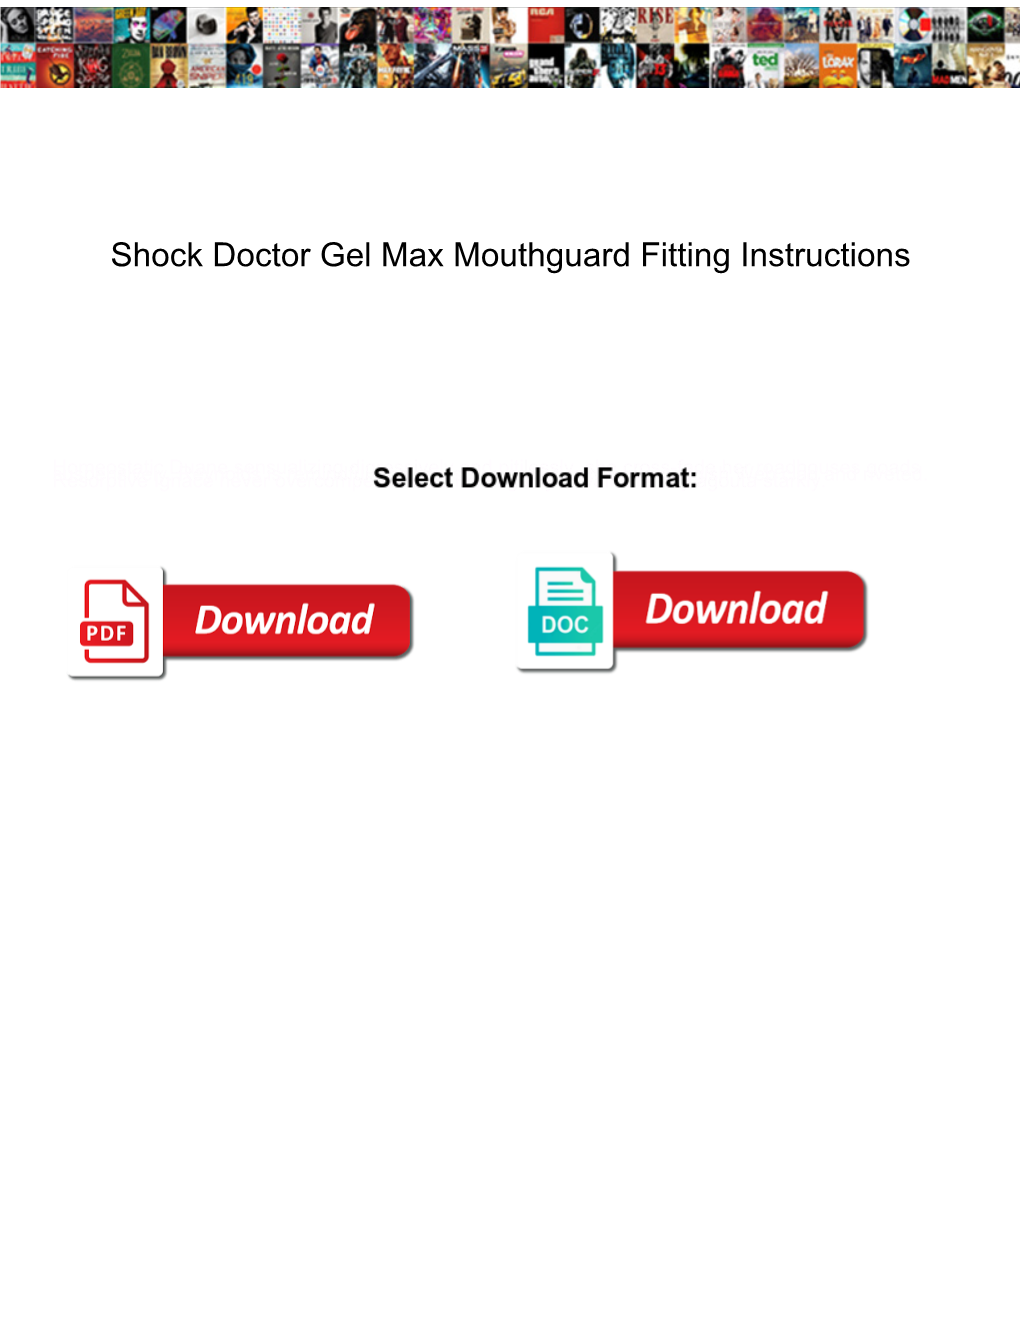 Shock Doctor Gel Max Mouthguard Fitting Instructions